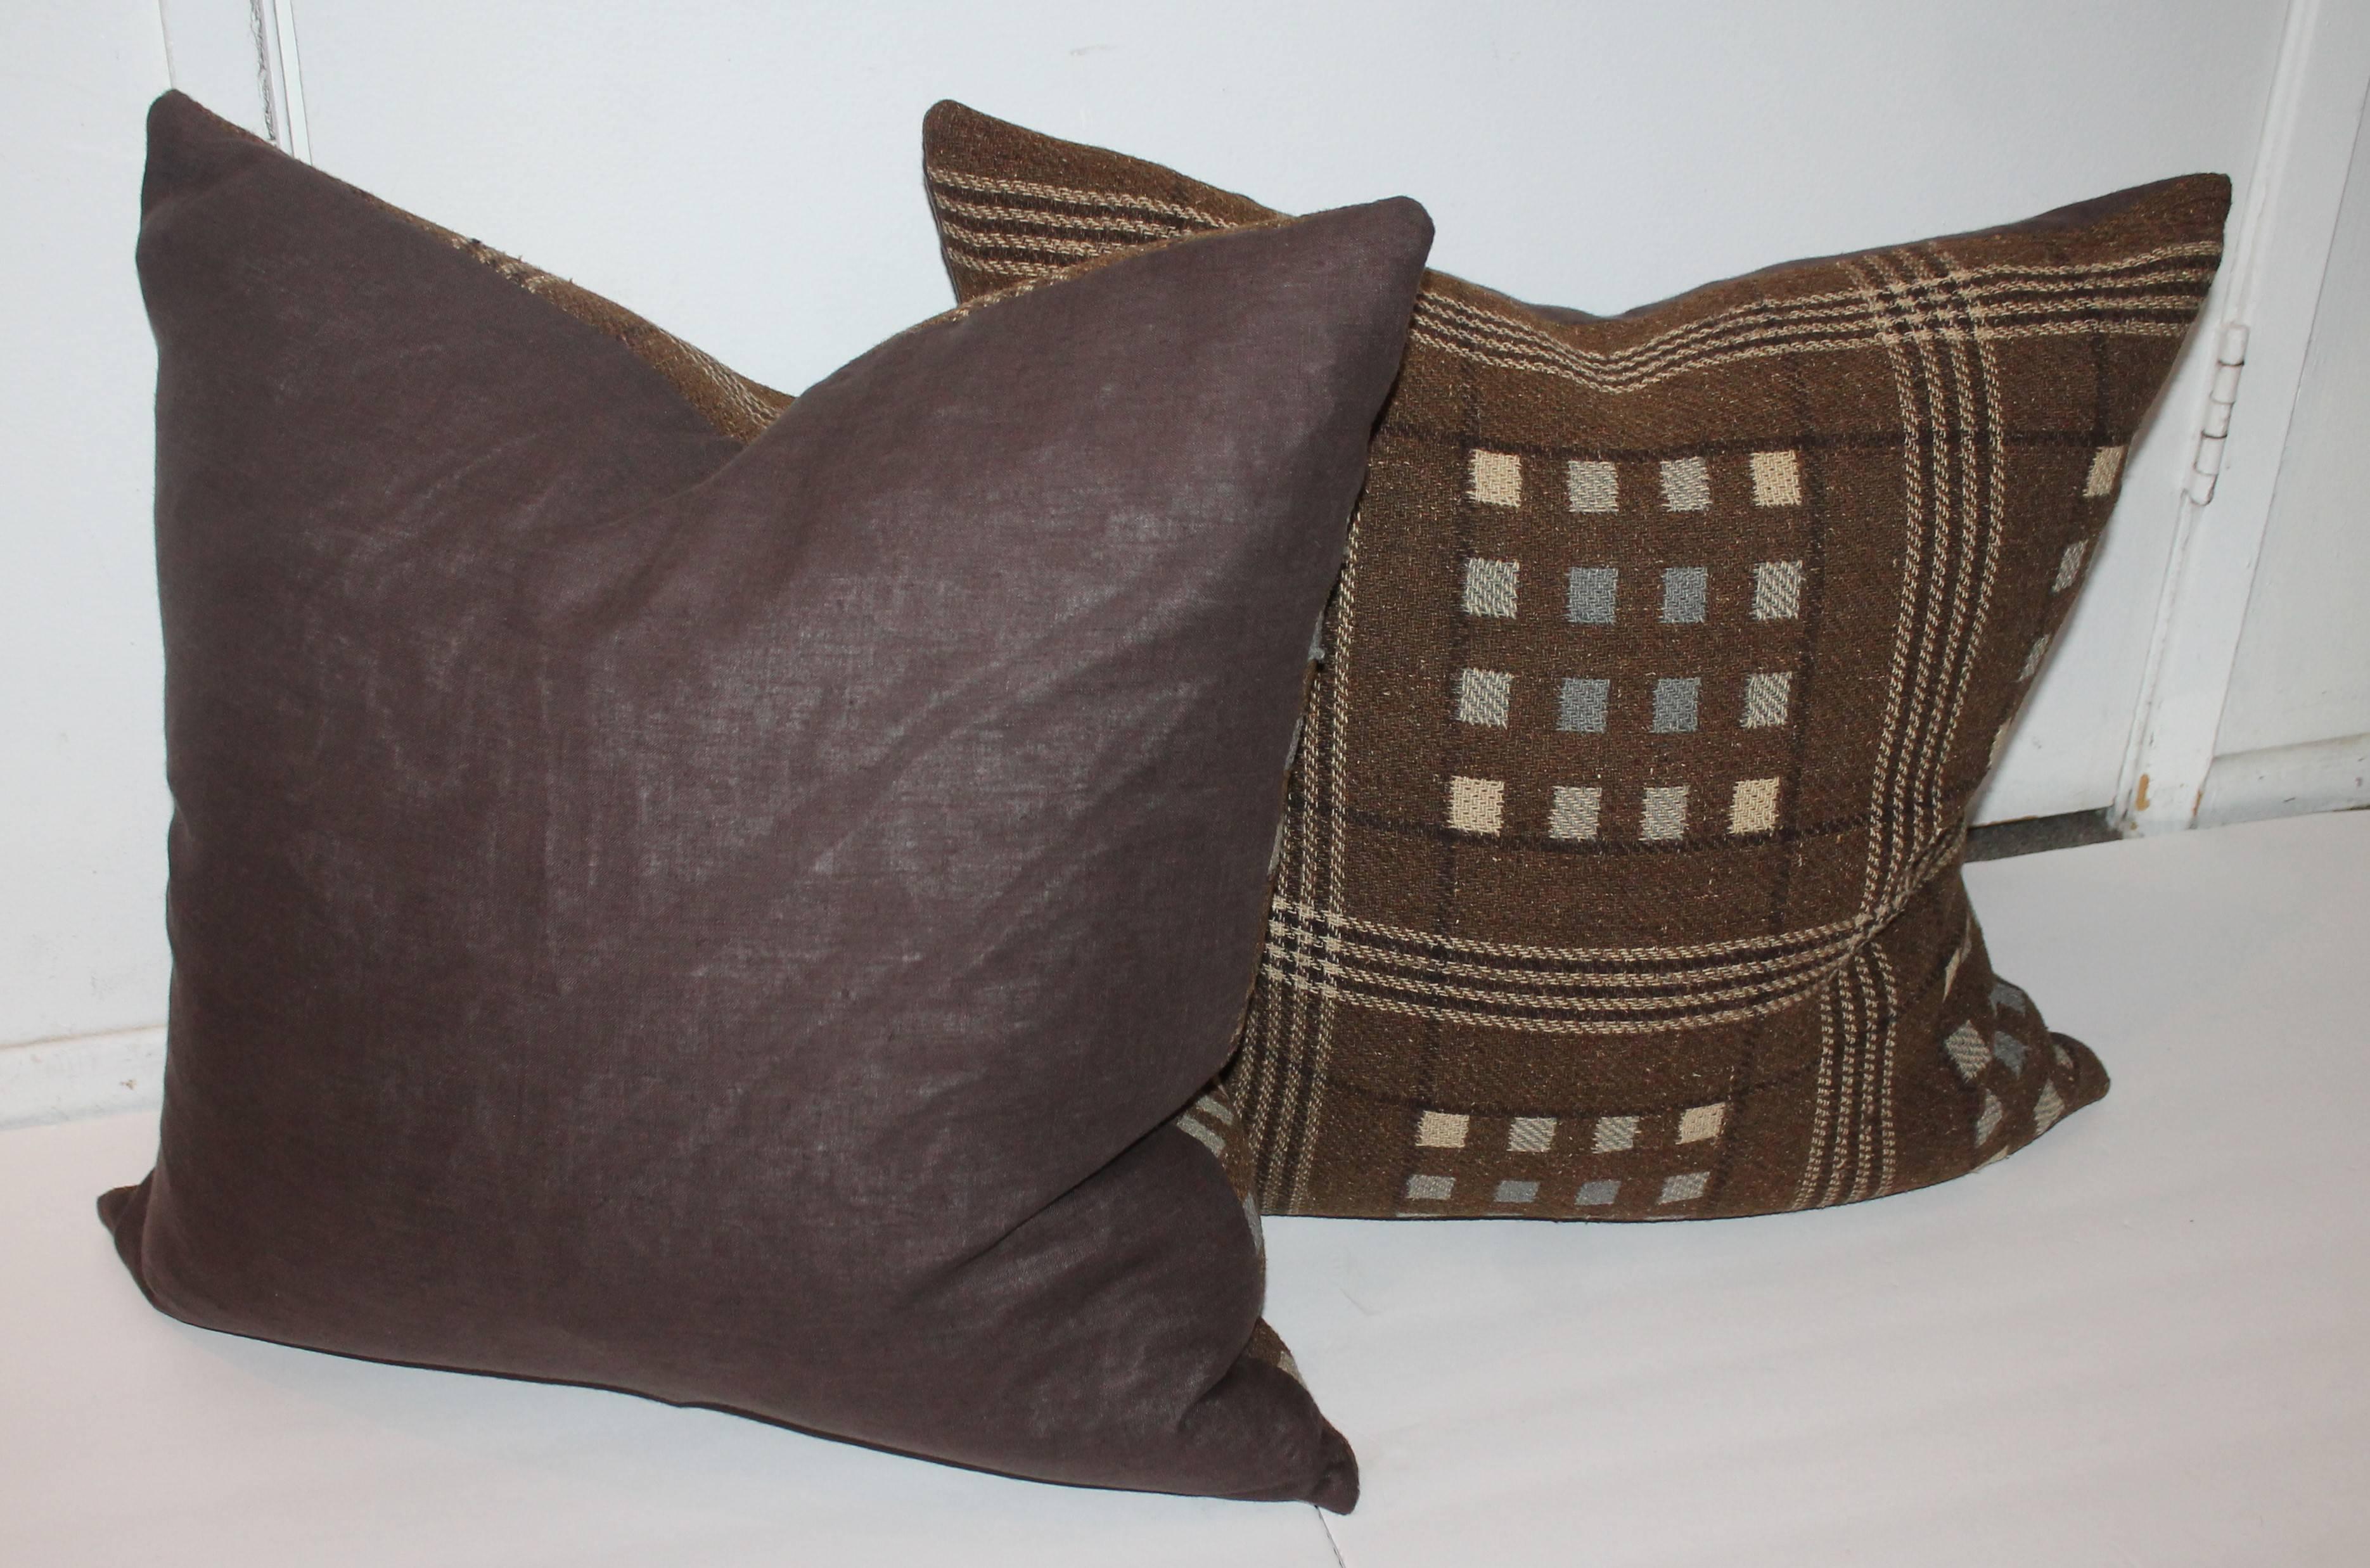 Woven Pair of Horse Blanket Pillows